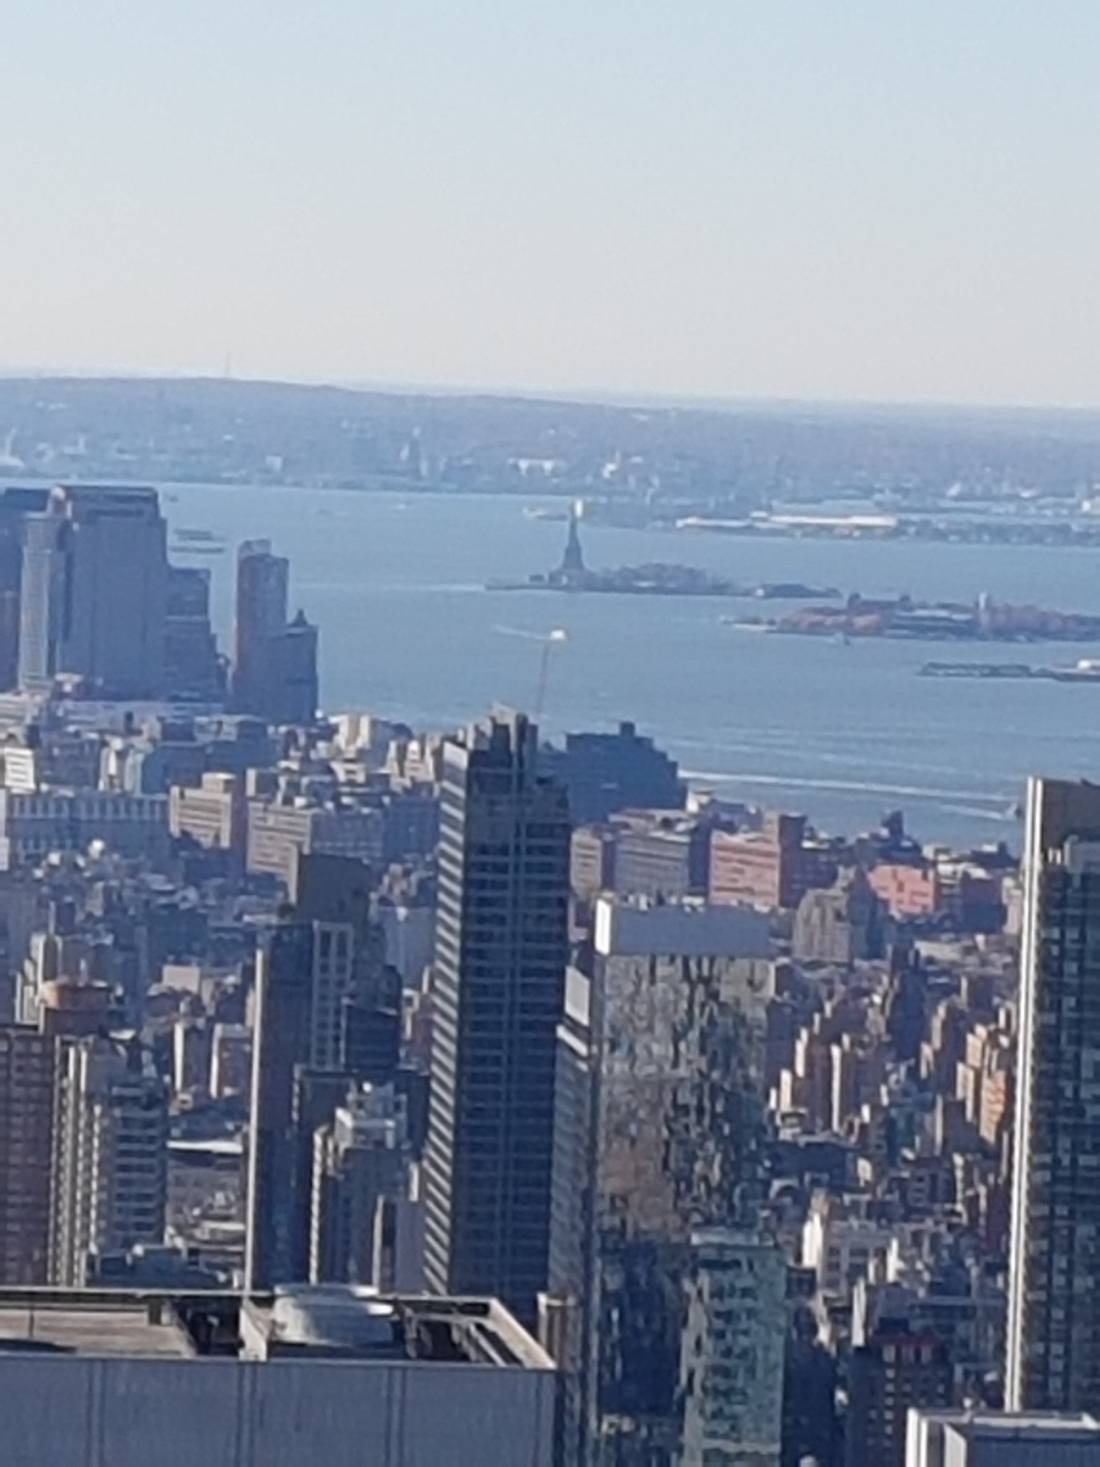 That’s the Statue of Liberty in the distance.